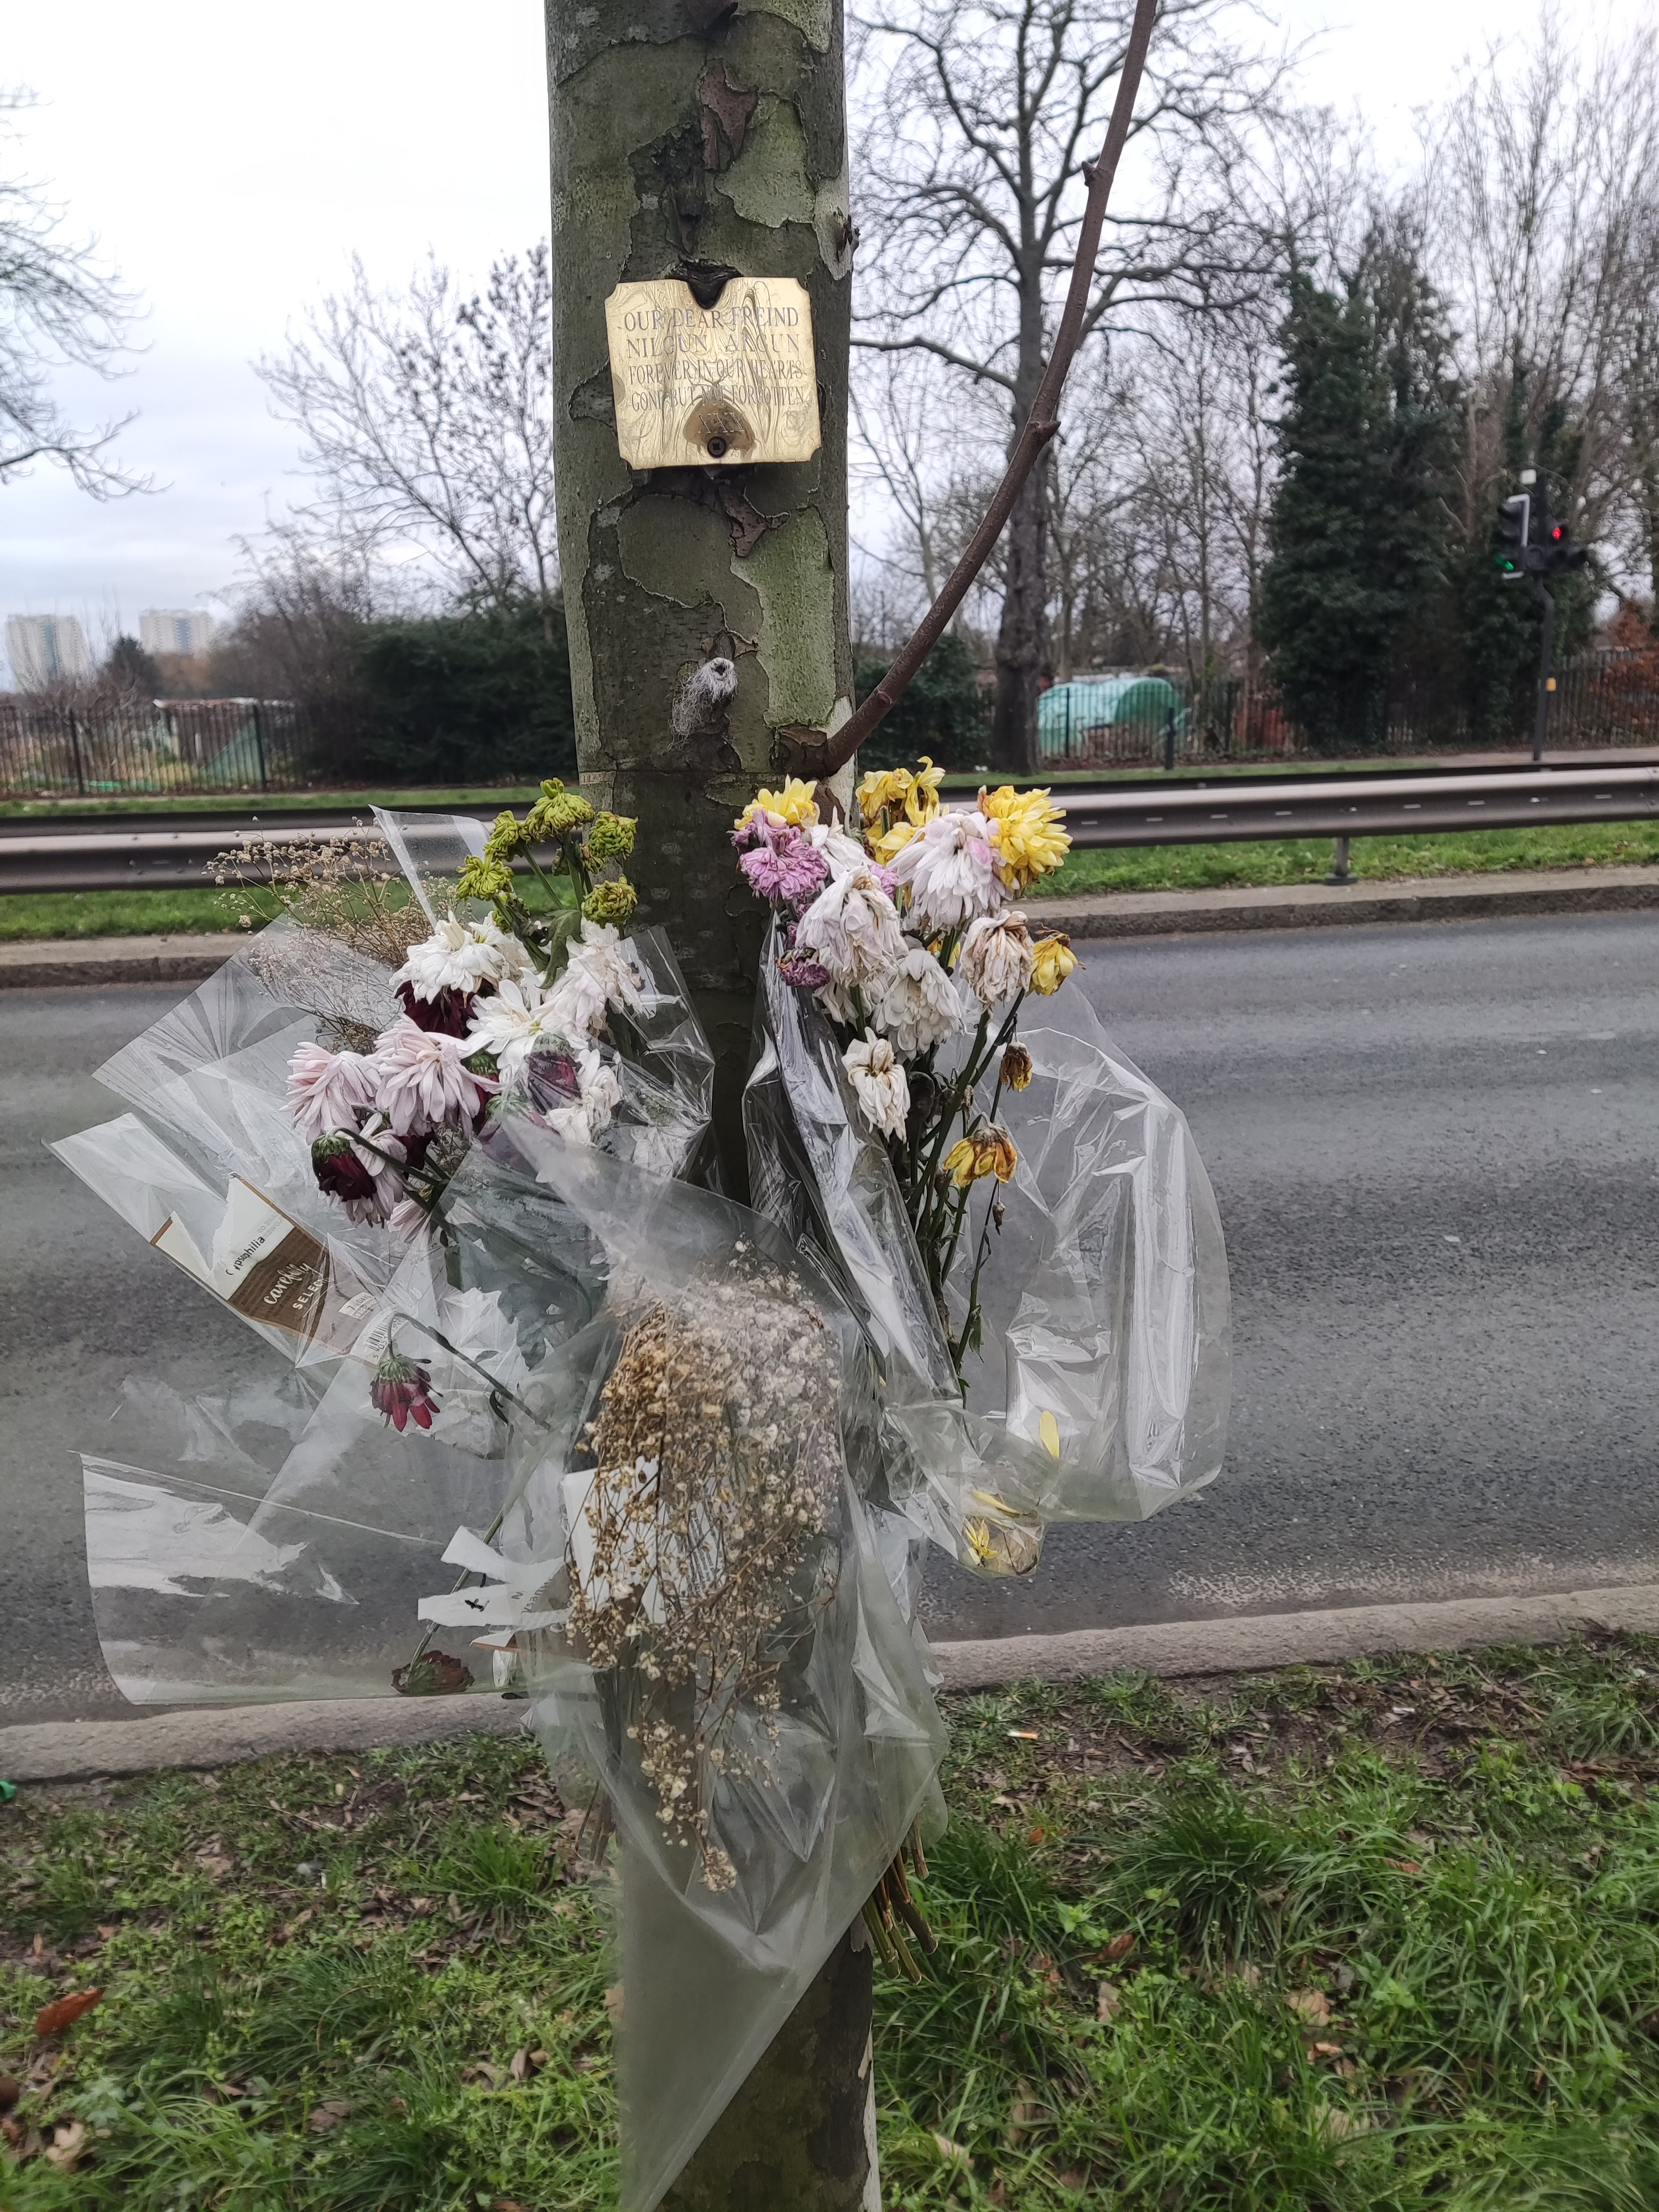 In 2017, Nilgün Akgün, 44, was killed as she tried to cross the same junction on the A10